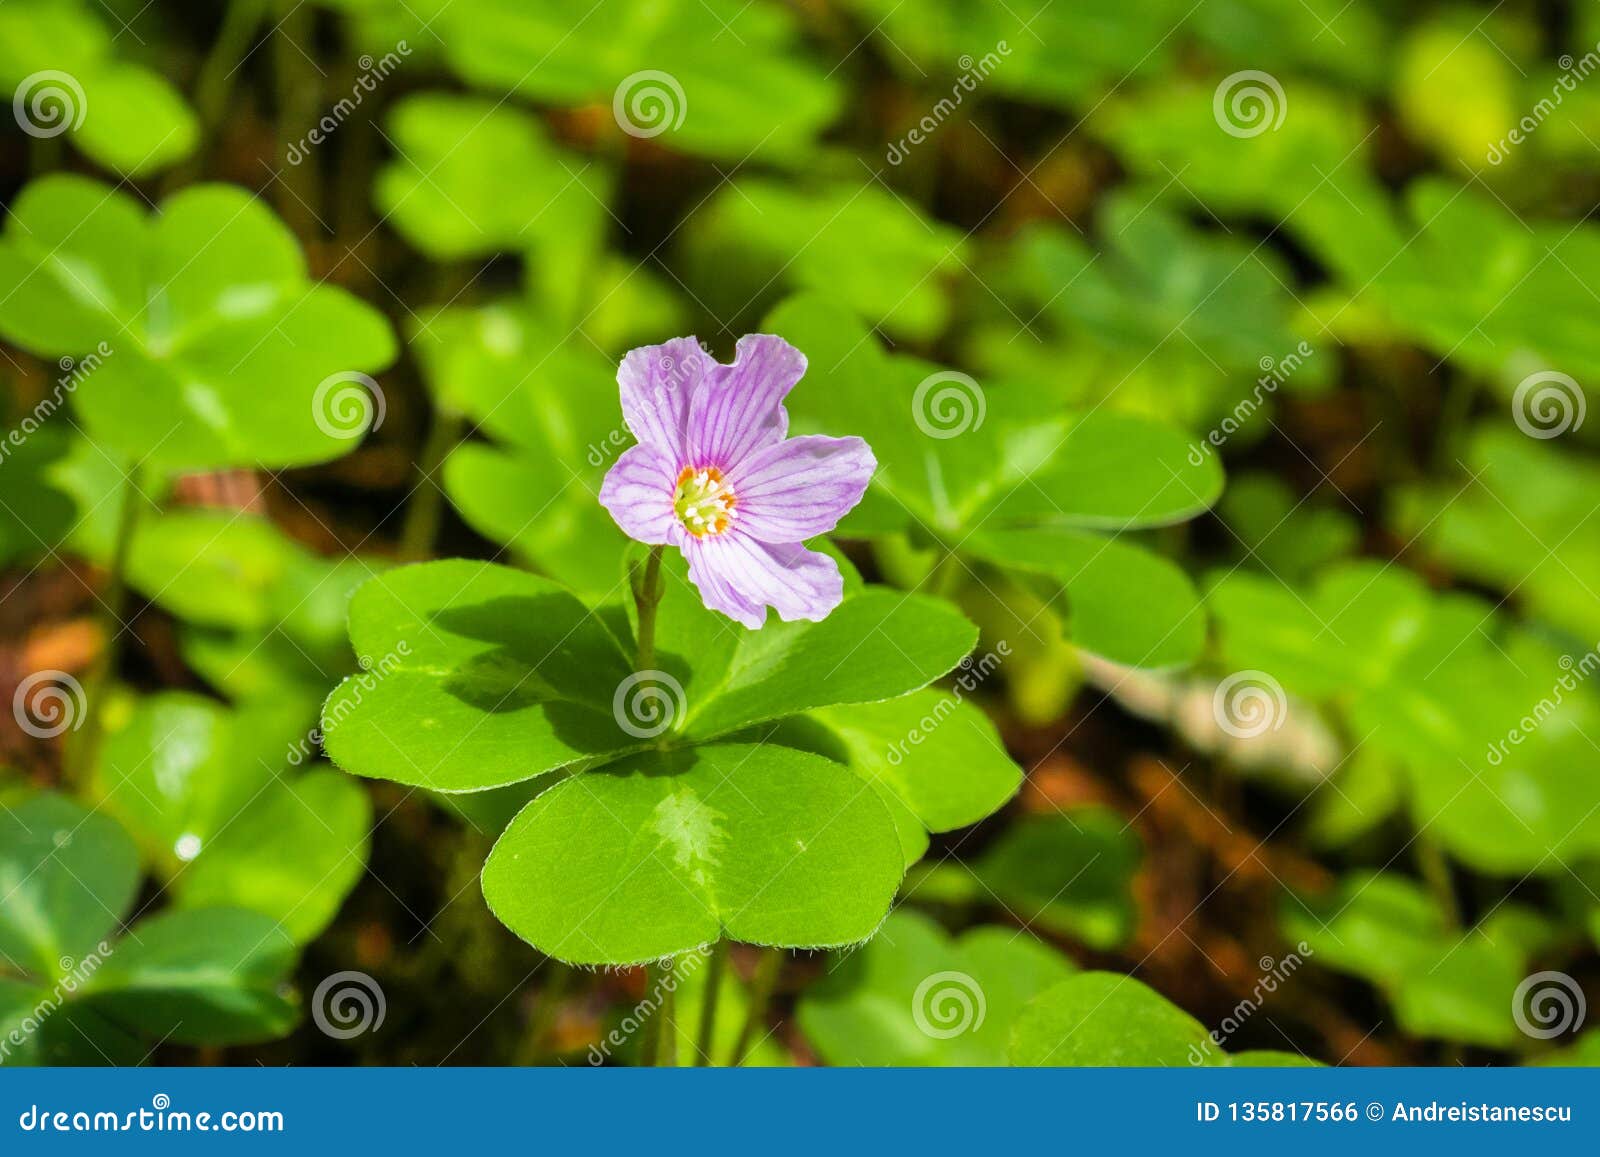 redwood sorrel flower and leaves oxalis oregana in the forests of santa cruz mountains, san francisco bay area, california